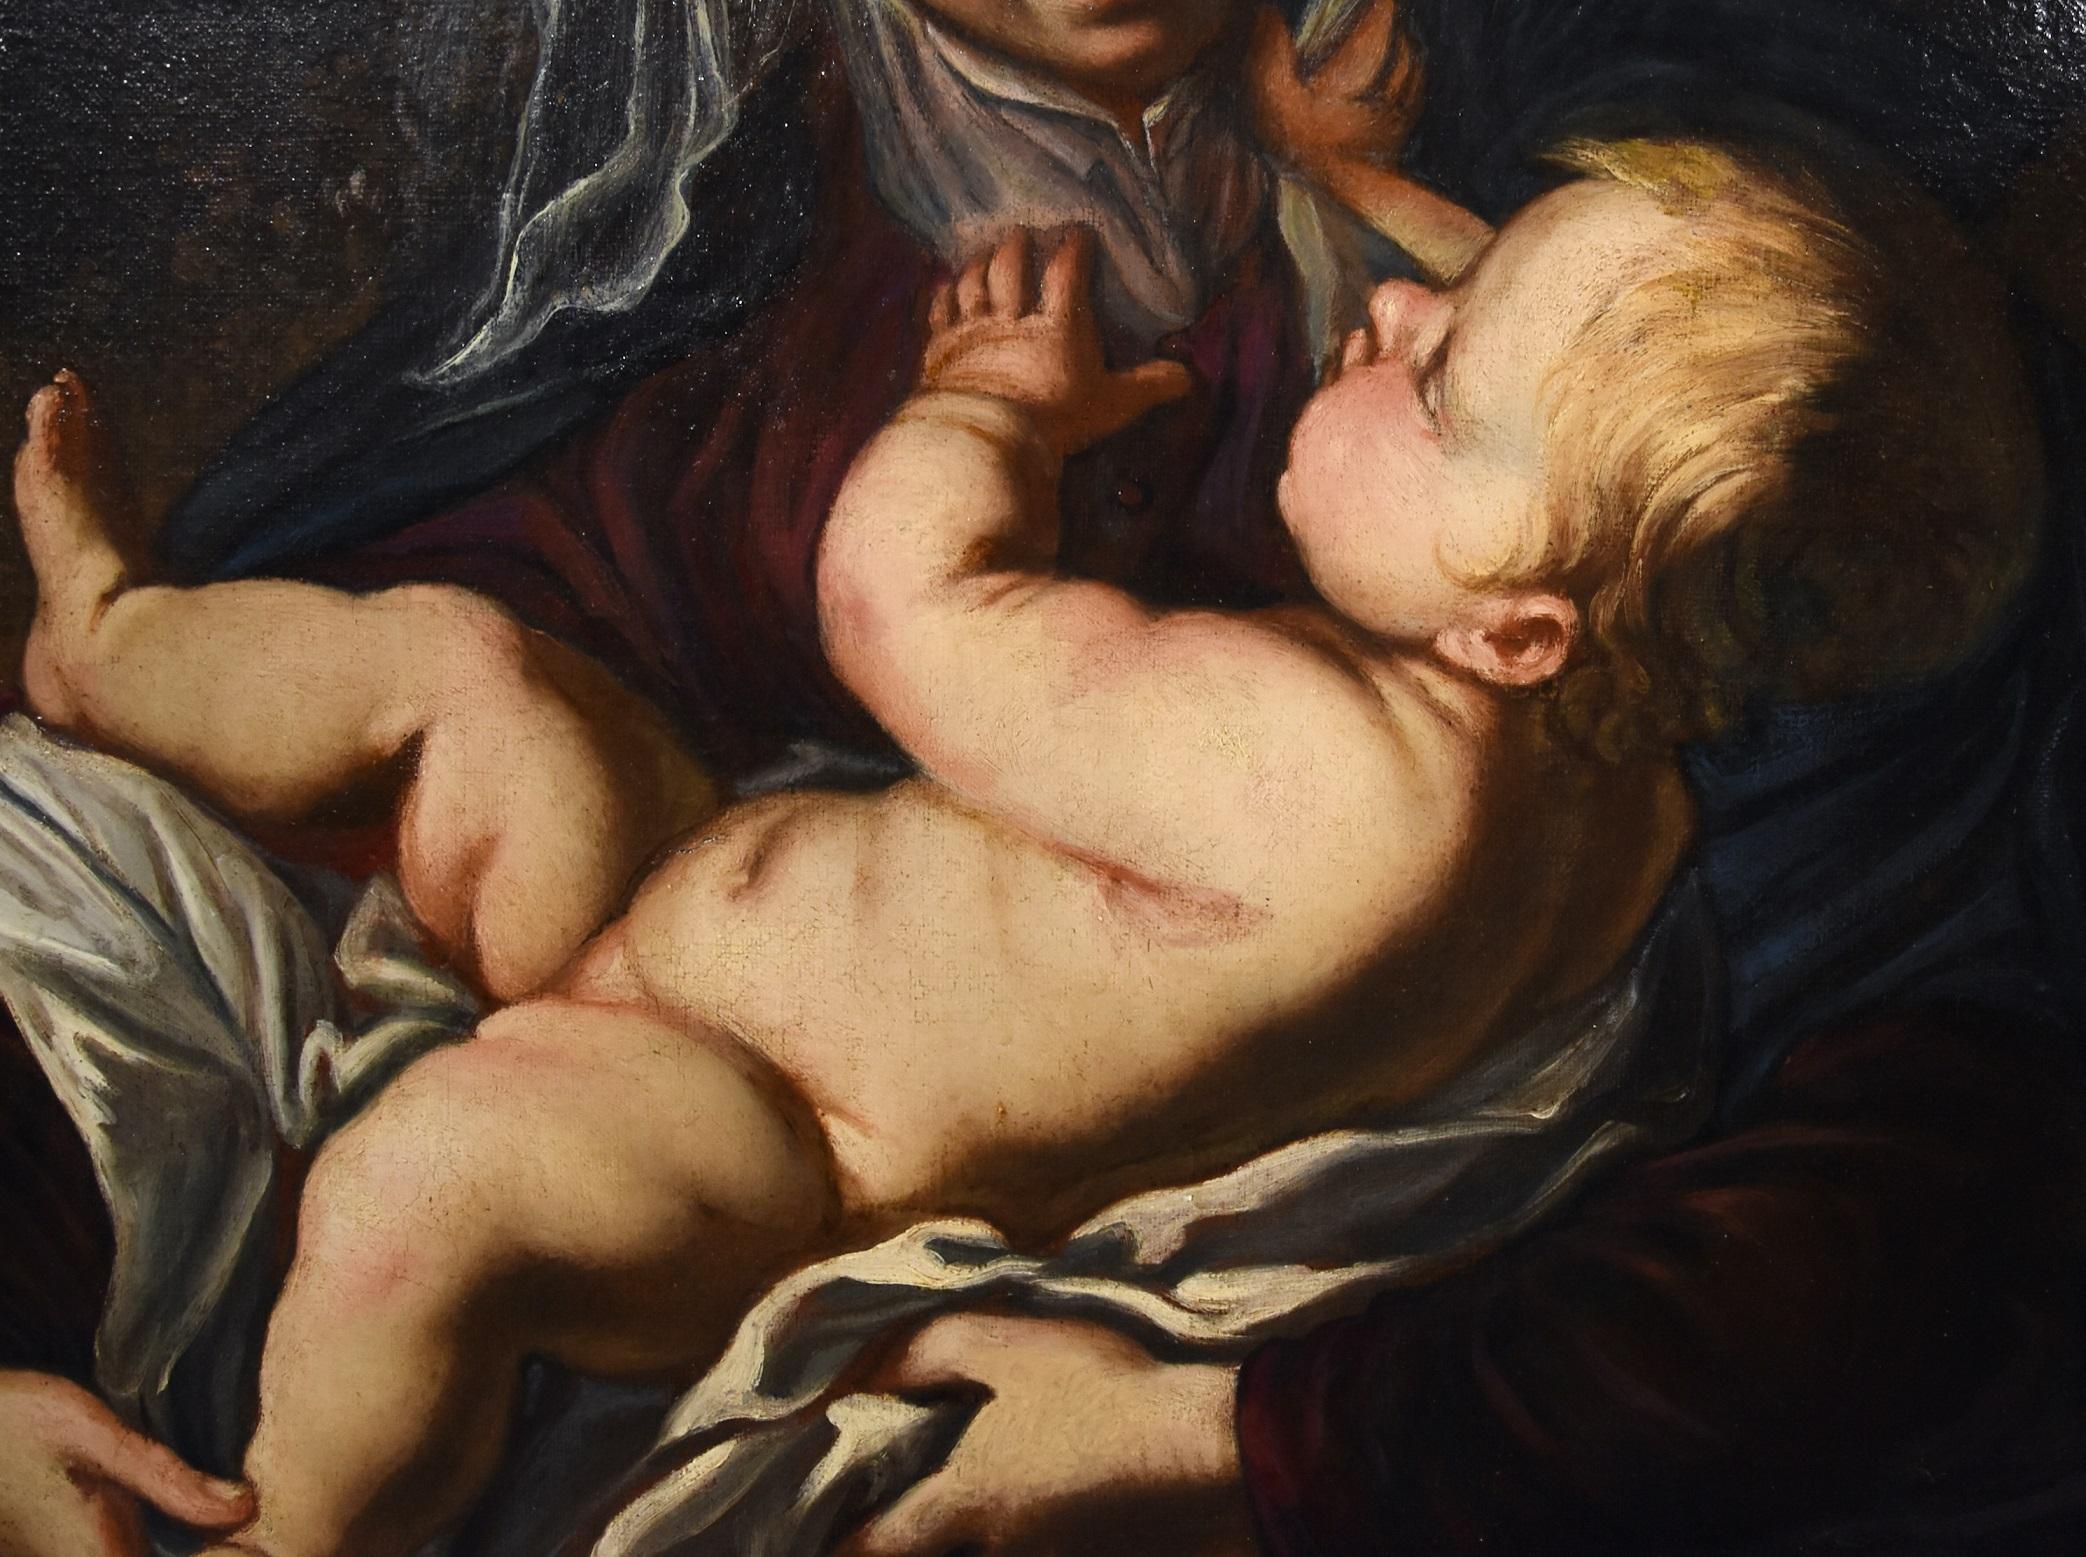 Emilian Caravaggesque painter of the early seventeenth century
Alessandro Tiarini (Bologna, 1577 - 1668), attributable
Madonna and Child

Early seventeenth century

Oil painting on canvas
cm. 96 x 82
In frame cm. 111 x 98

This composition, where